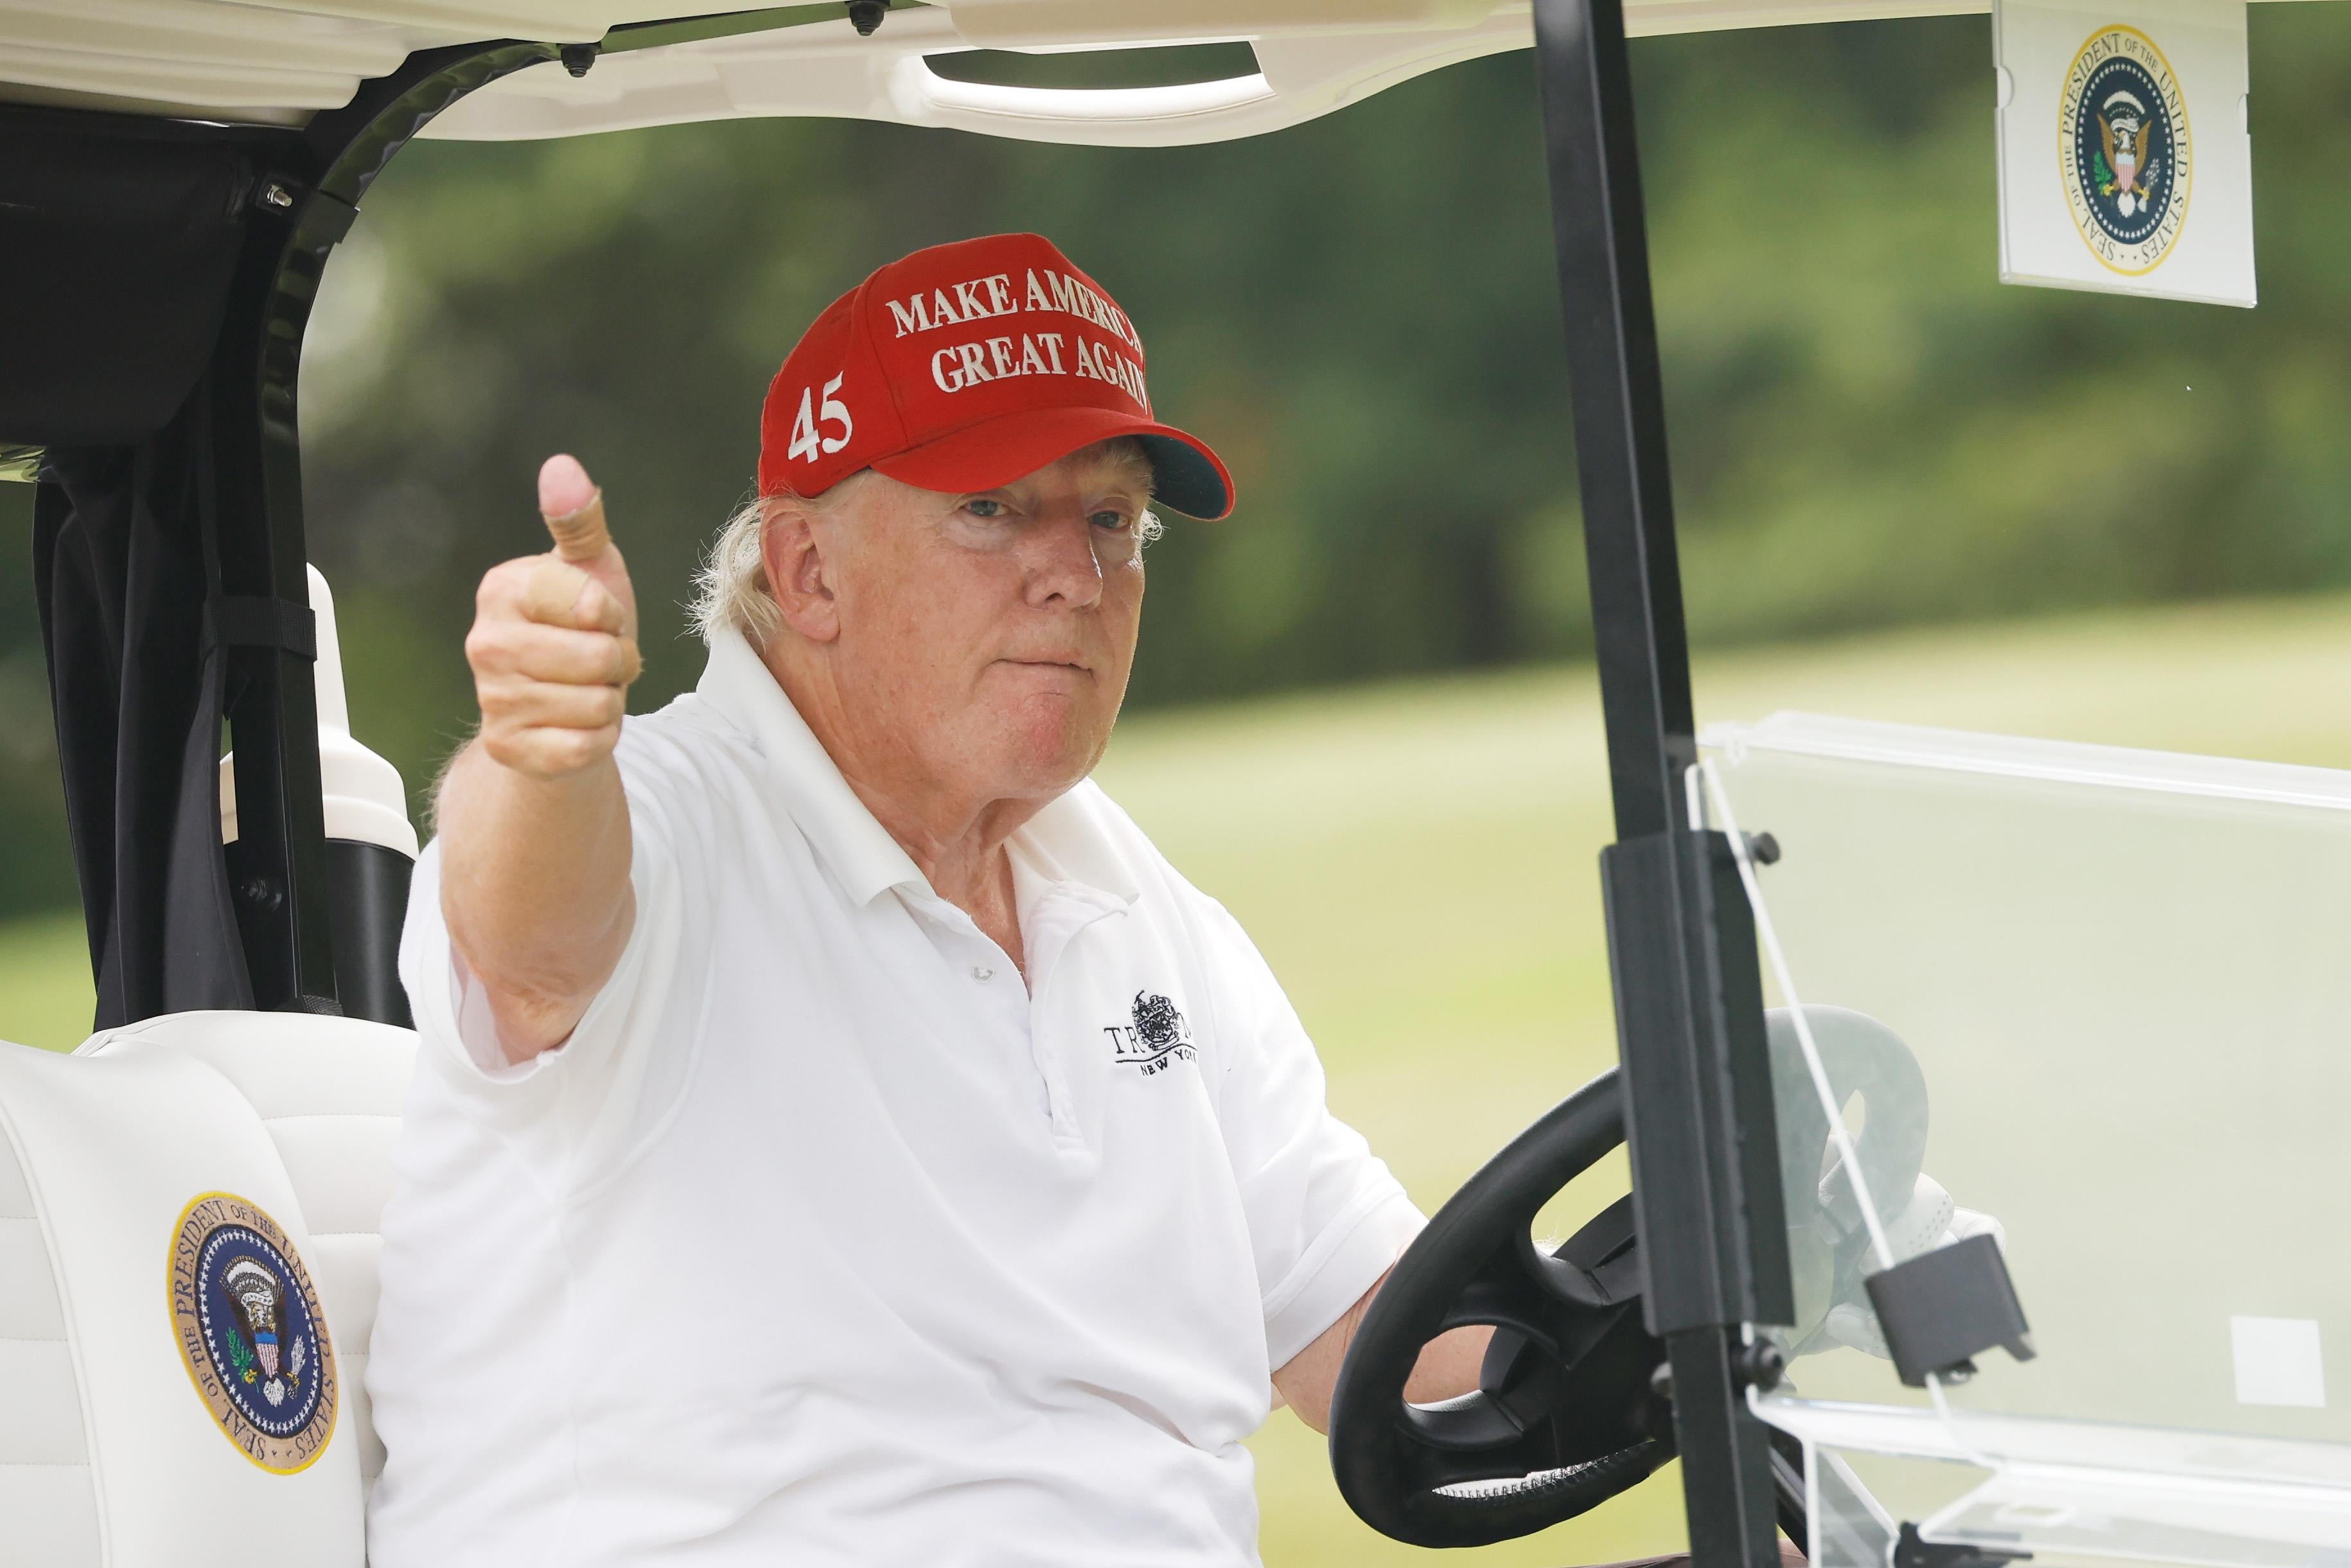 Trump looking pale and saggy in a golf cart.